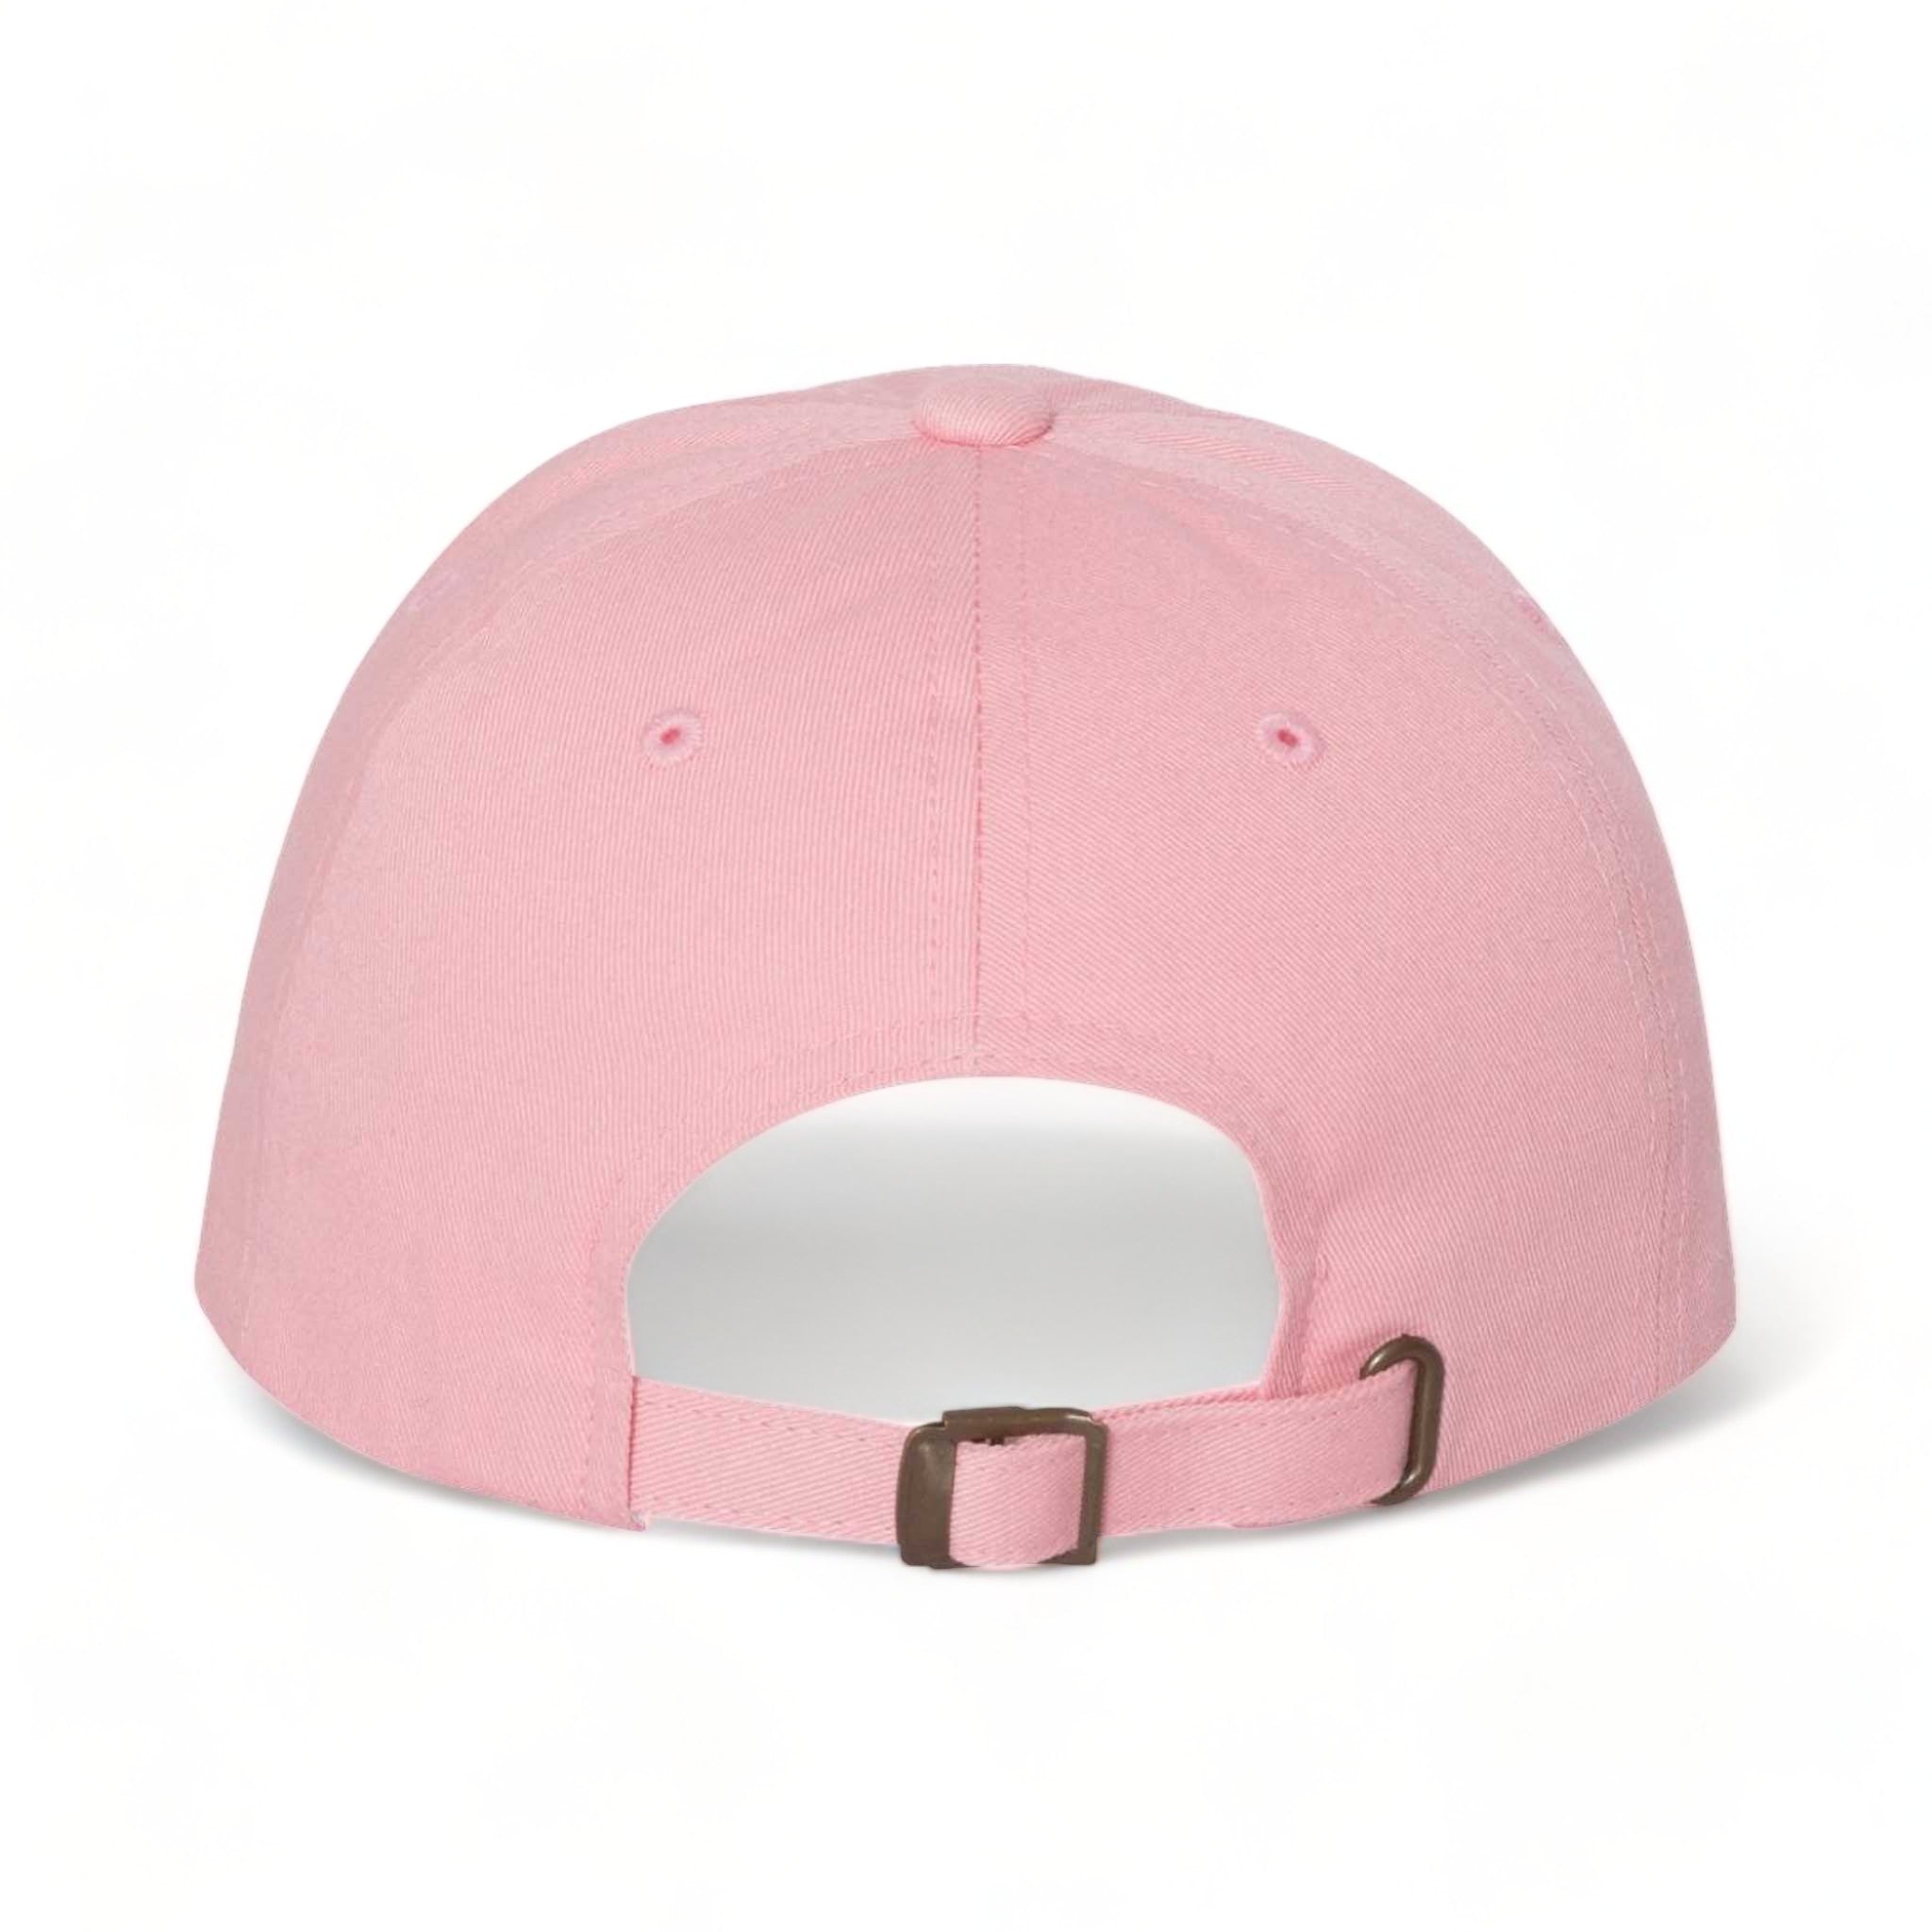 Back view of YP Classics 6245CM custom hat in pink